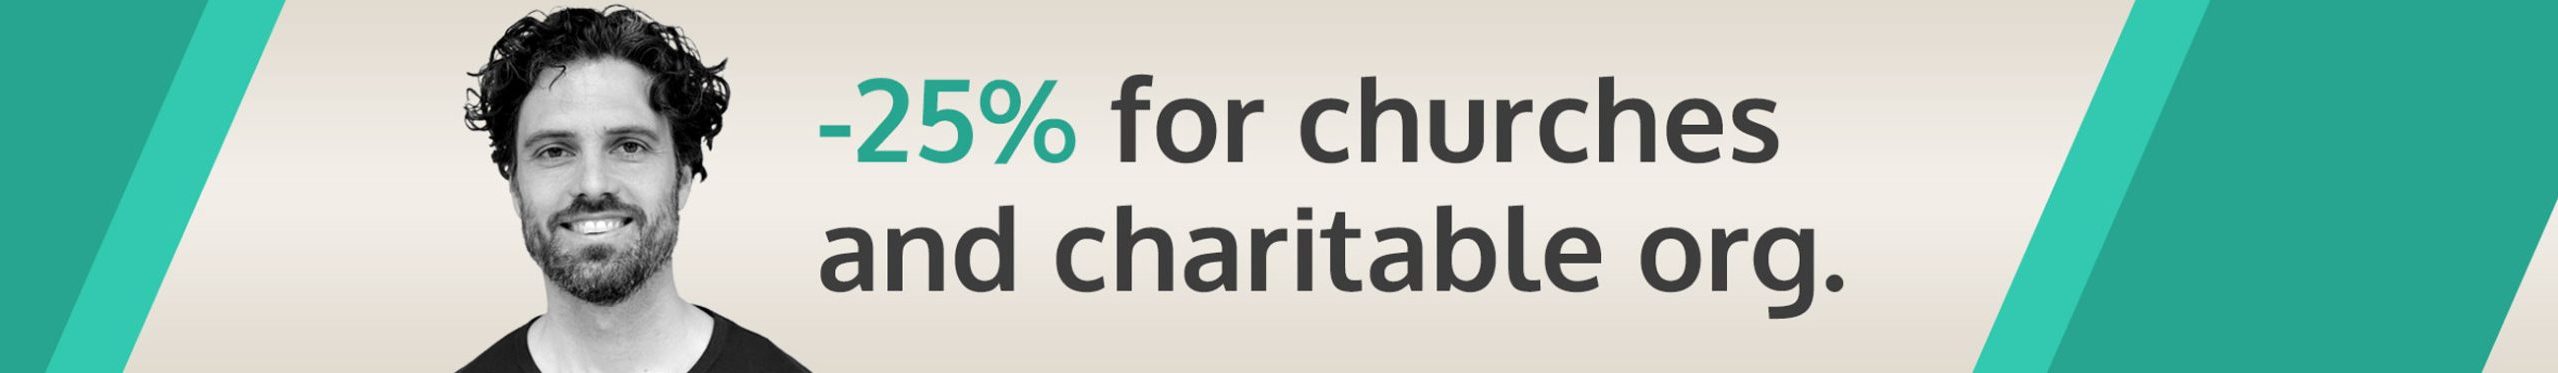 discount for churches and charitable organisations freelance graphic design